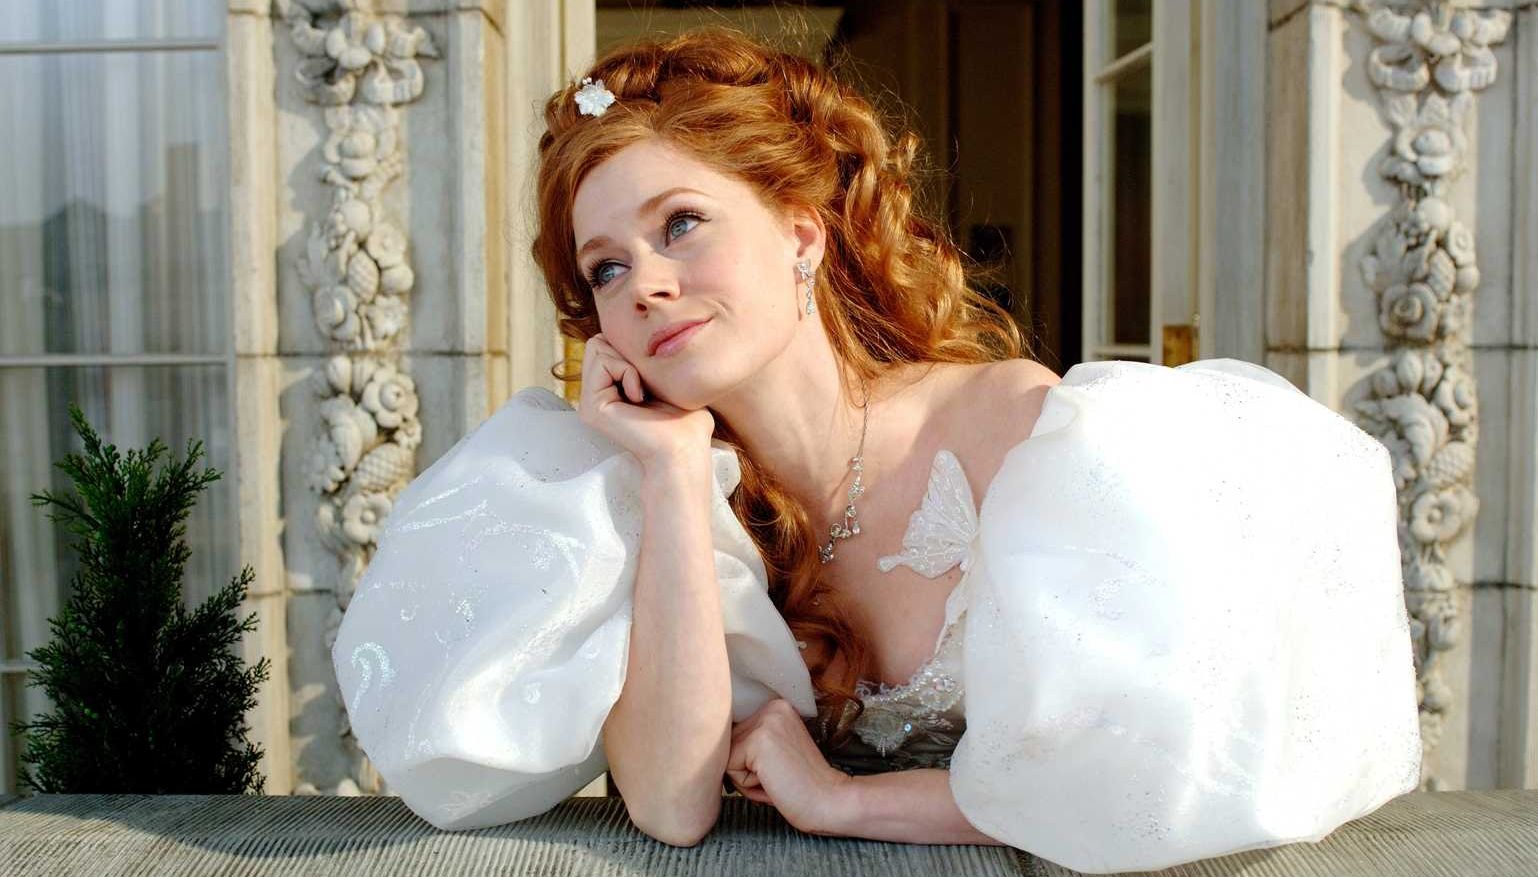 Disney will produce sequel to 'Enchanted' movie musical